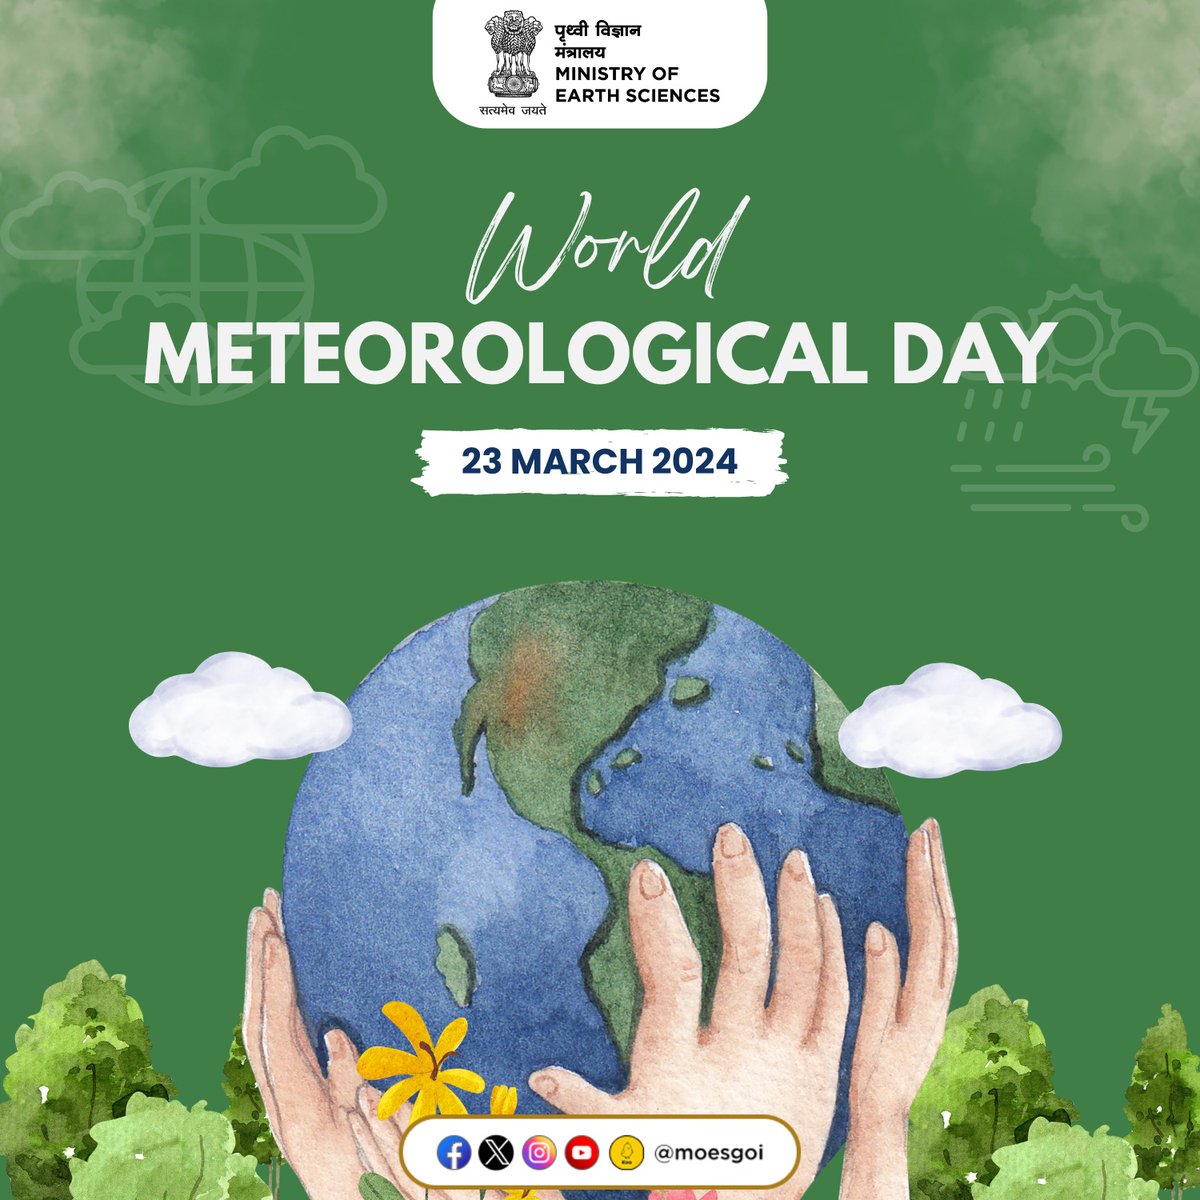 'At the Frontline of Climate Action': Let's celebrate the #worldmeteorologicalday by commemorating the tireless efforts of the scientific community, scaling new heights in meteorology aiding in achieving sustainable development goals by 2030.